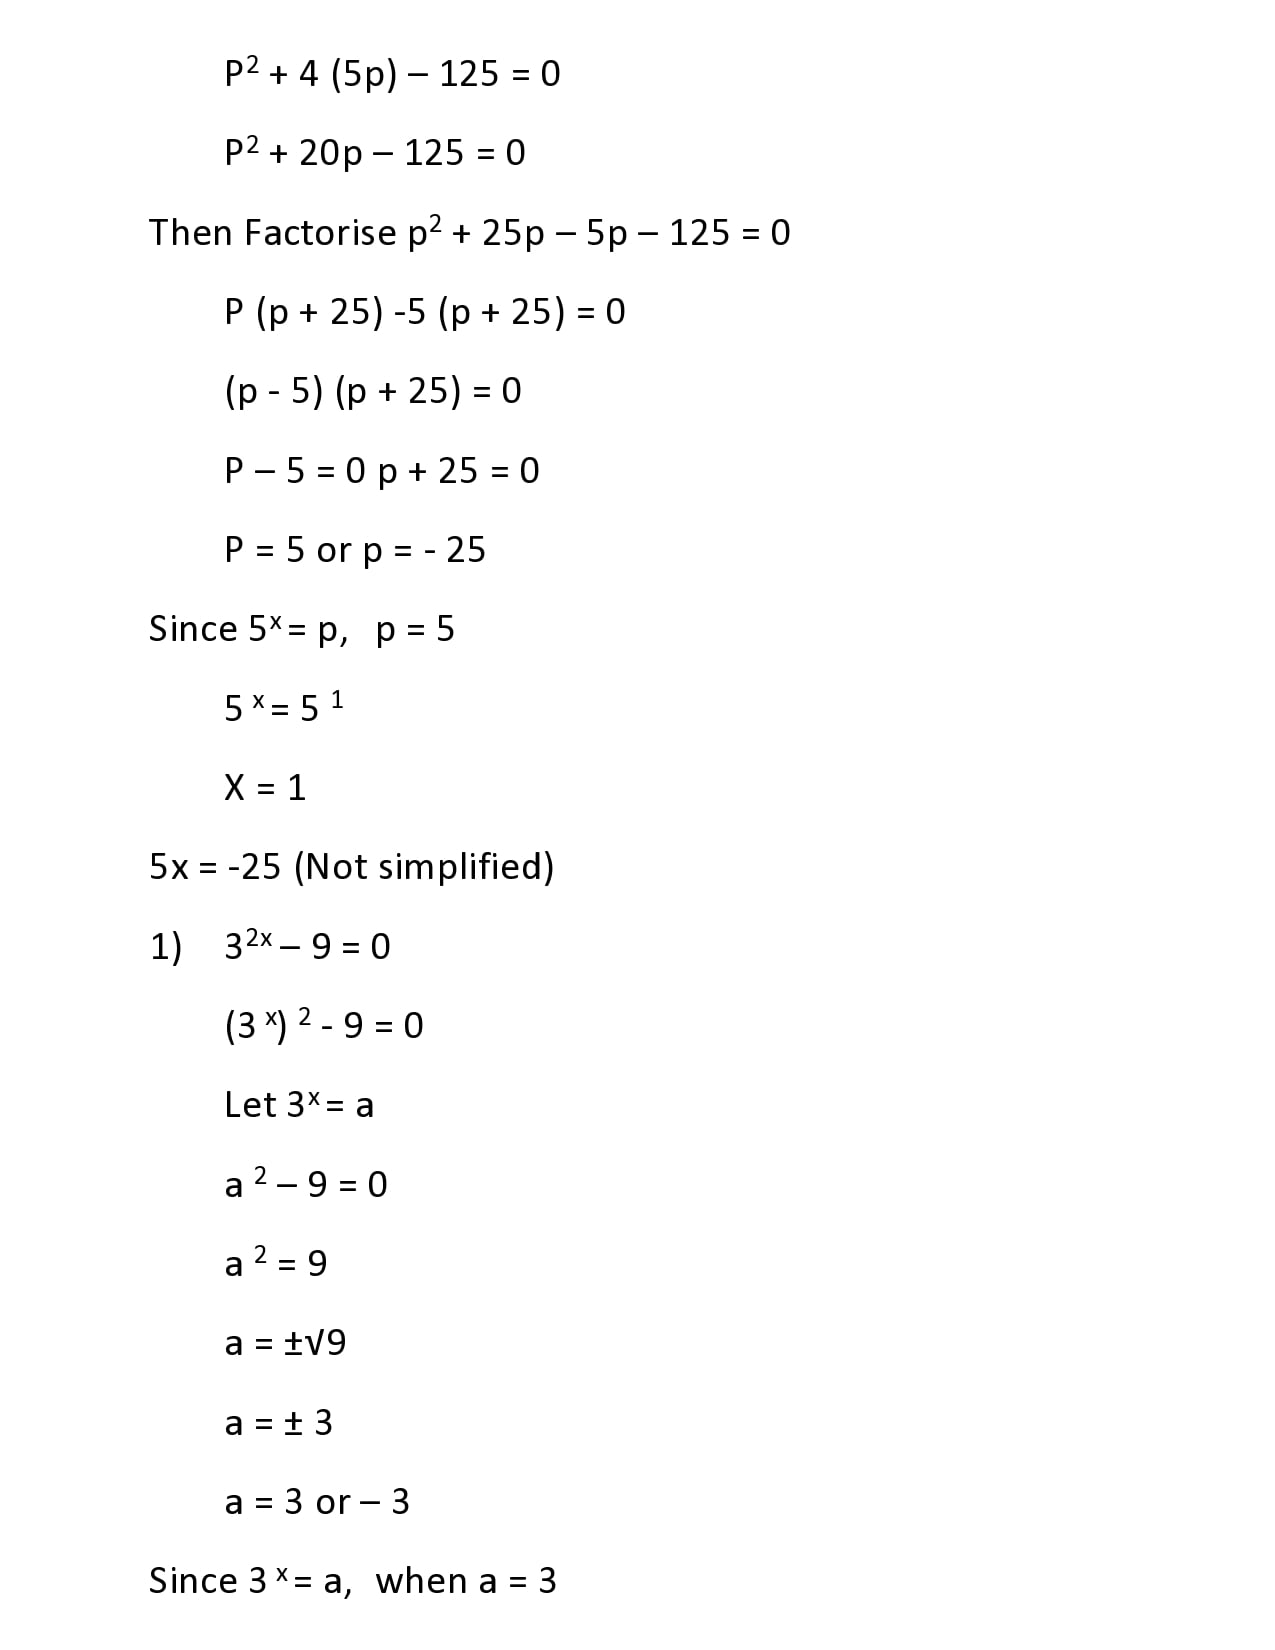 INDICIAL/EXPONENTIAL EQUATION5